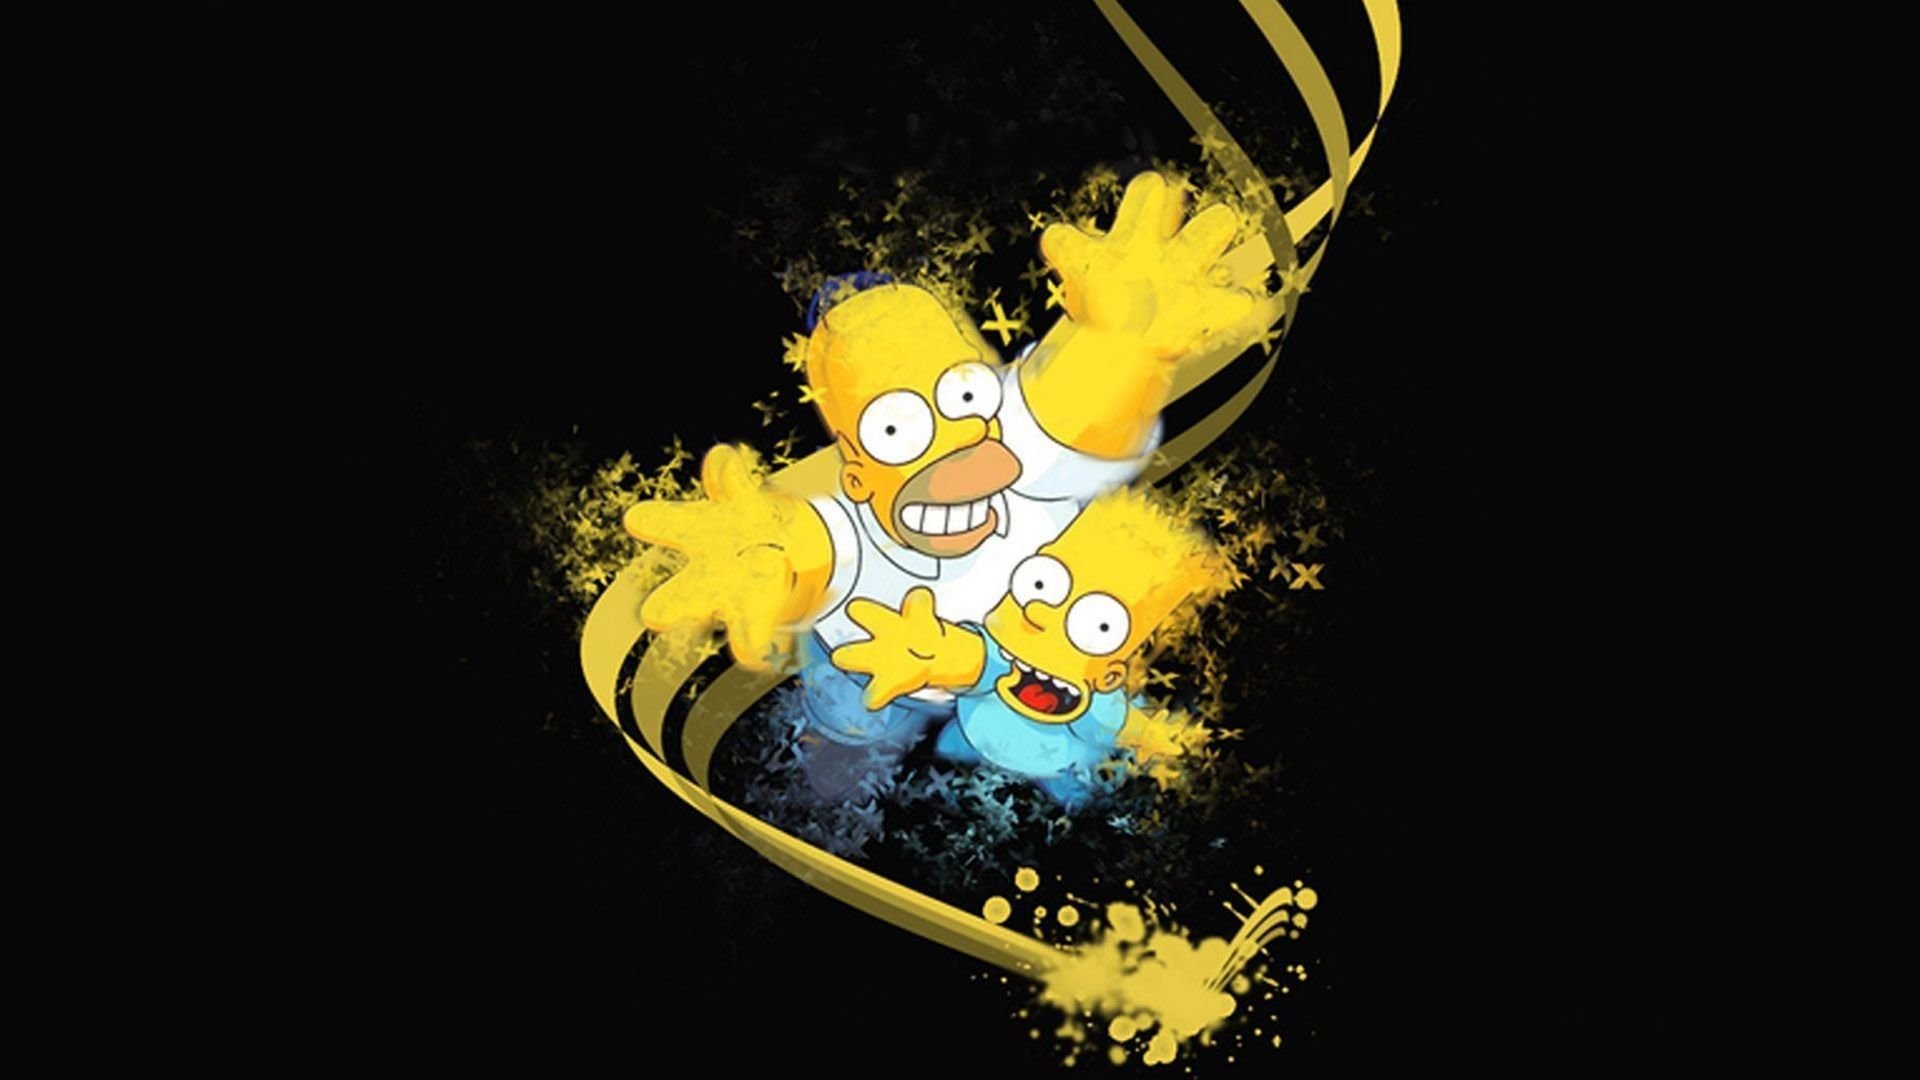 The Simpsons 4K Wallpapers New Tab 12  Free Fun Extension for Chrome   Crx4Chrome